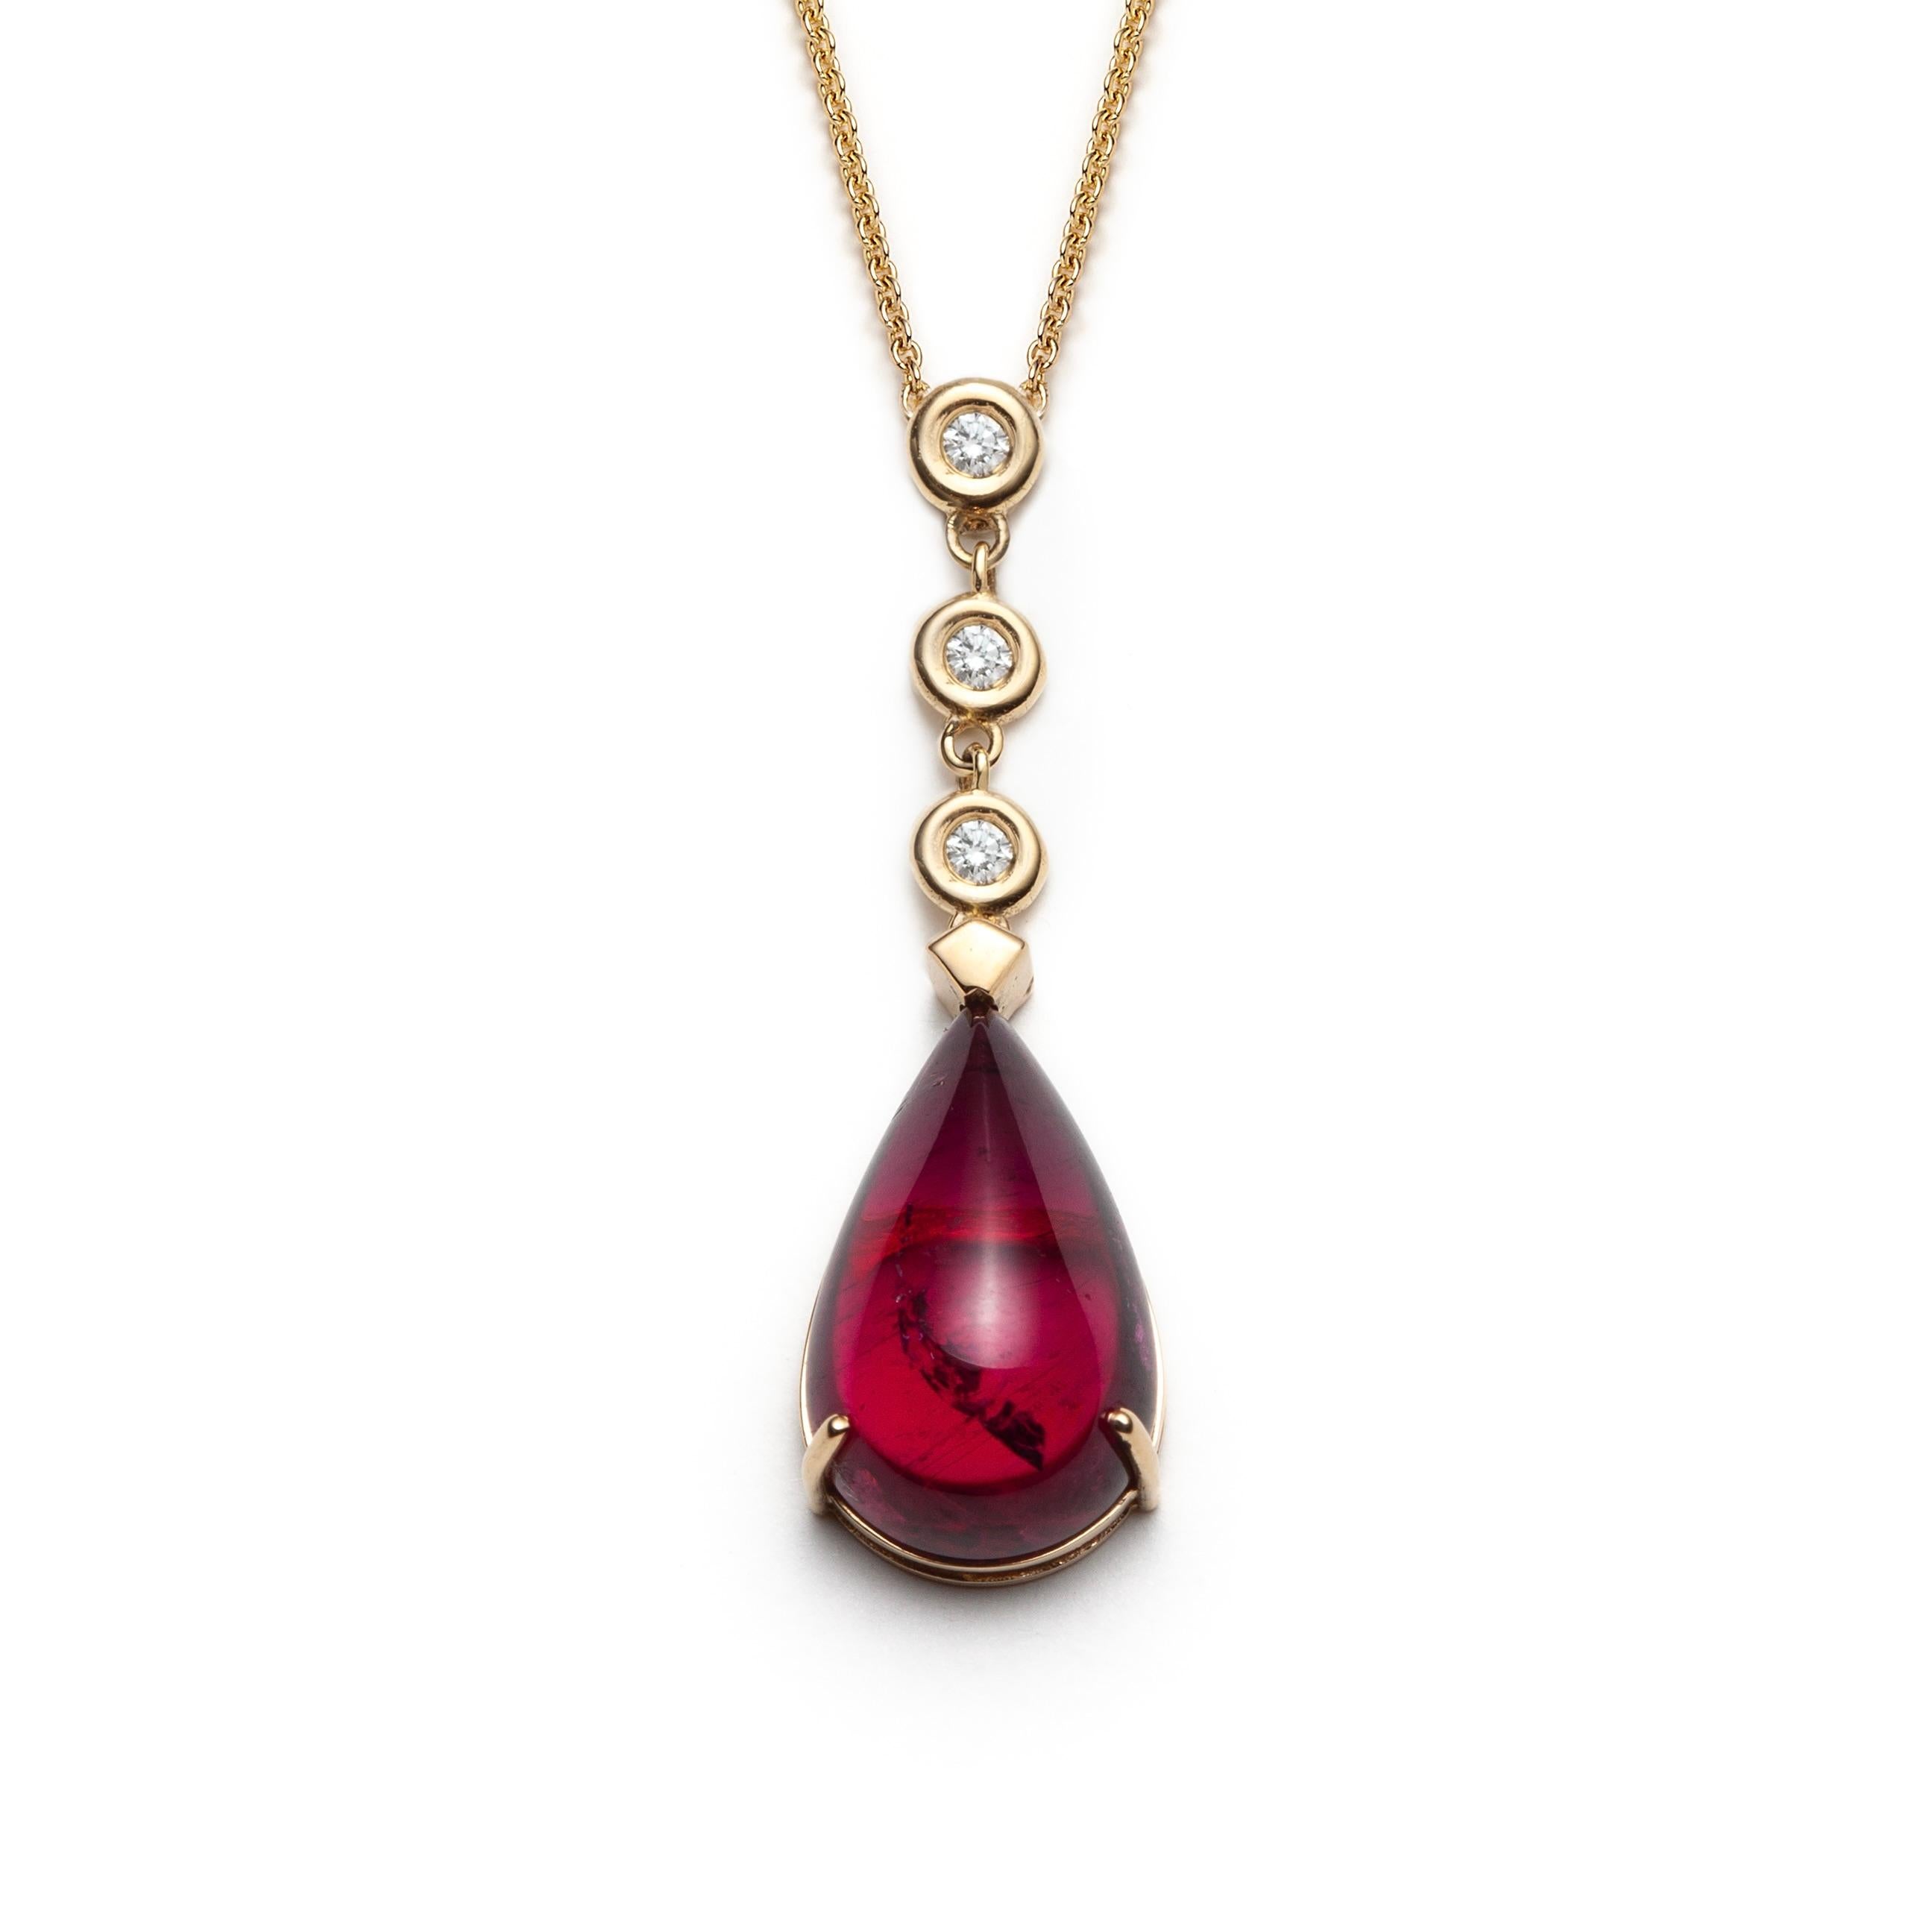 The Freya necklace features a teardrop rubellite (red tourmaline) cabochon set in 18k yellow gold enhanced by starry diamonds. The pendant glides freely on the 18” (45cm) chain.

The FREYA necklace celebrates the passion that animates our lives.
It